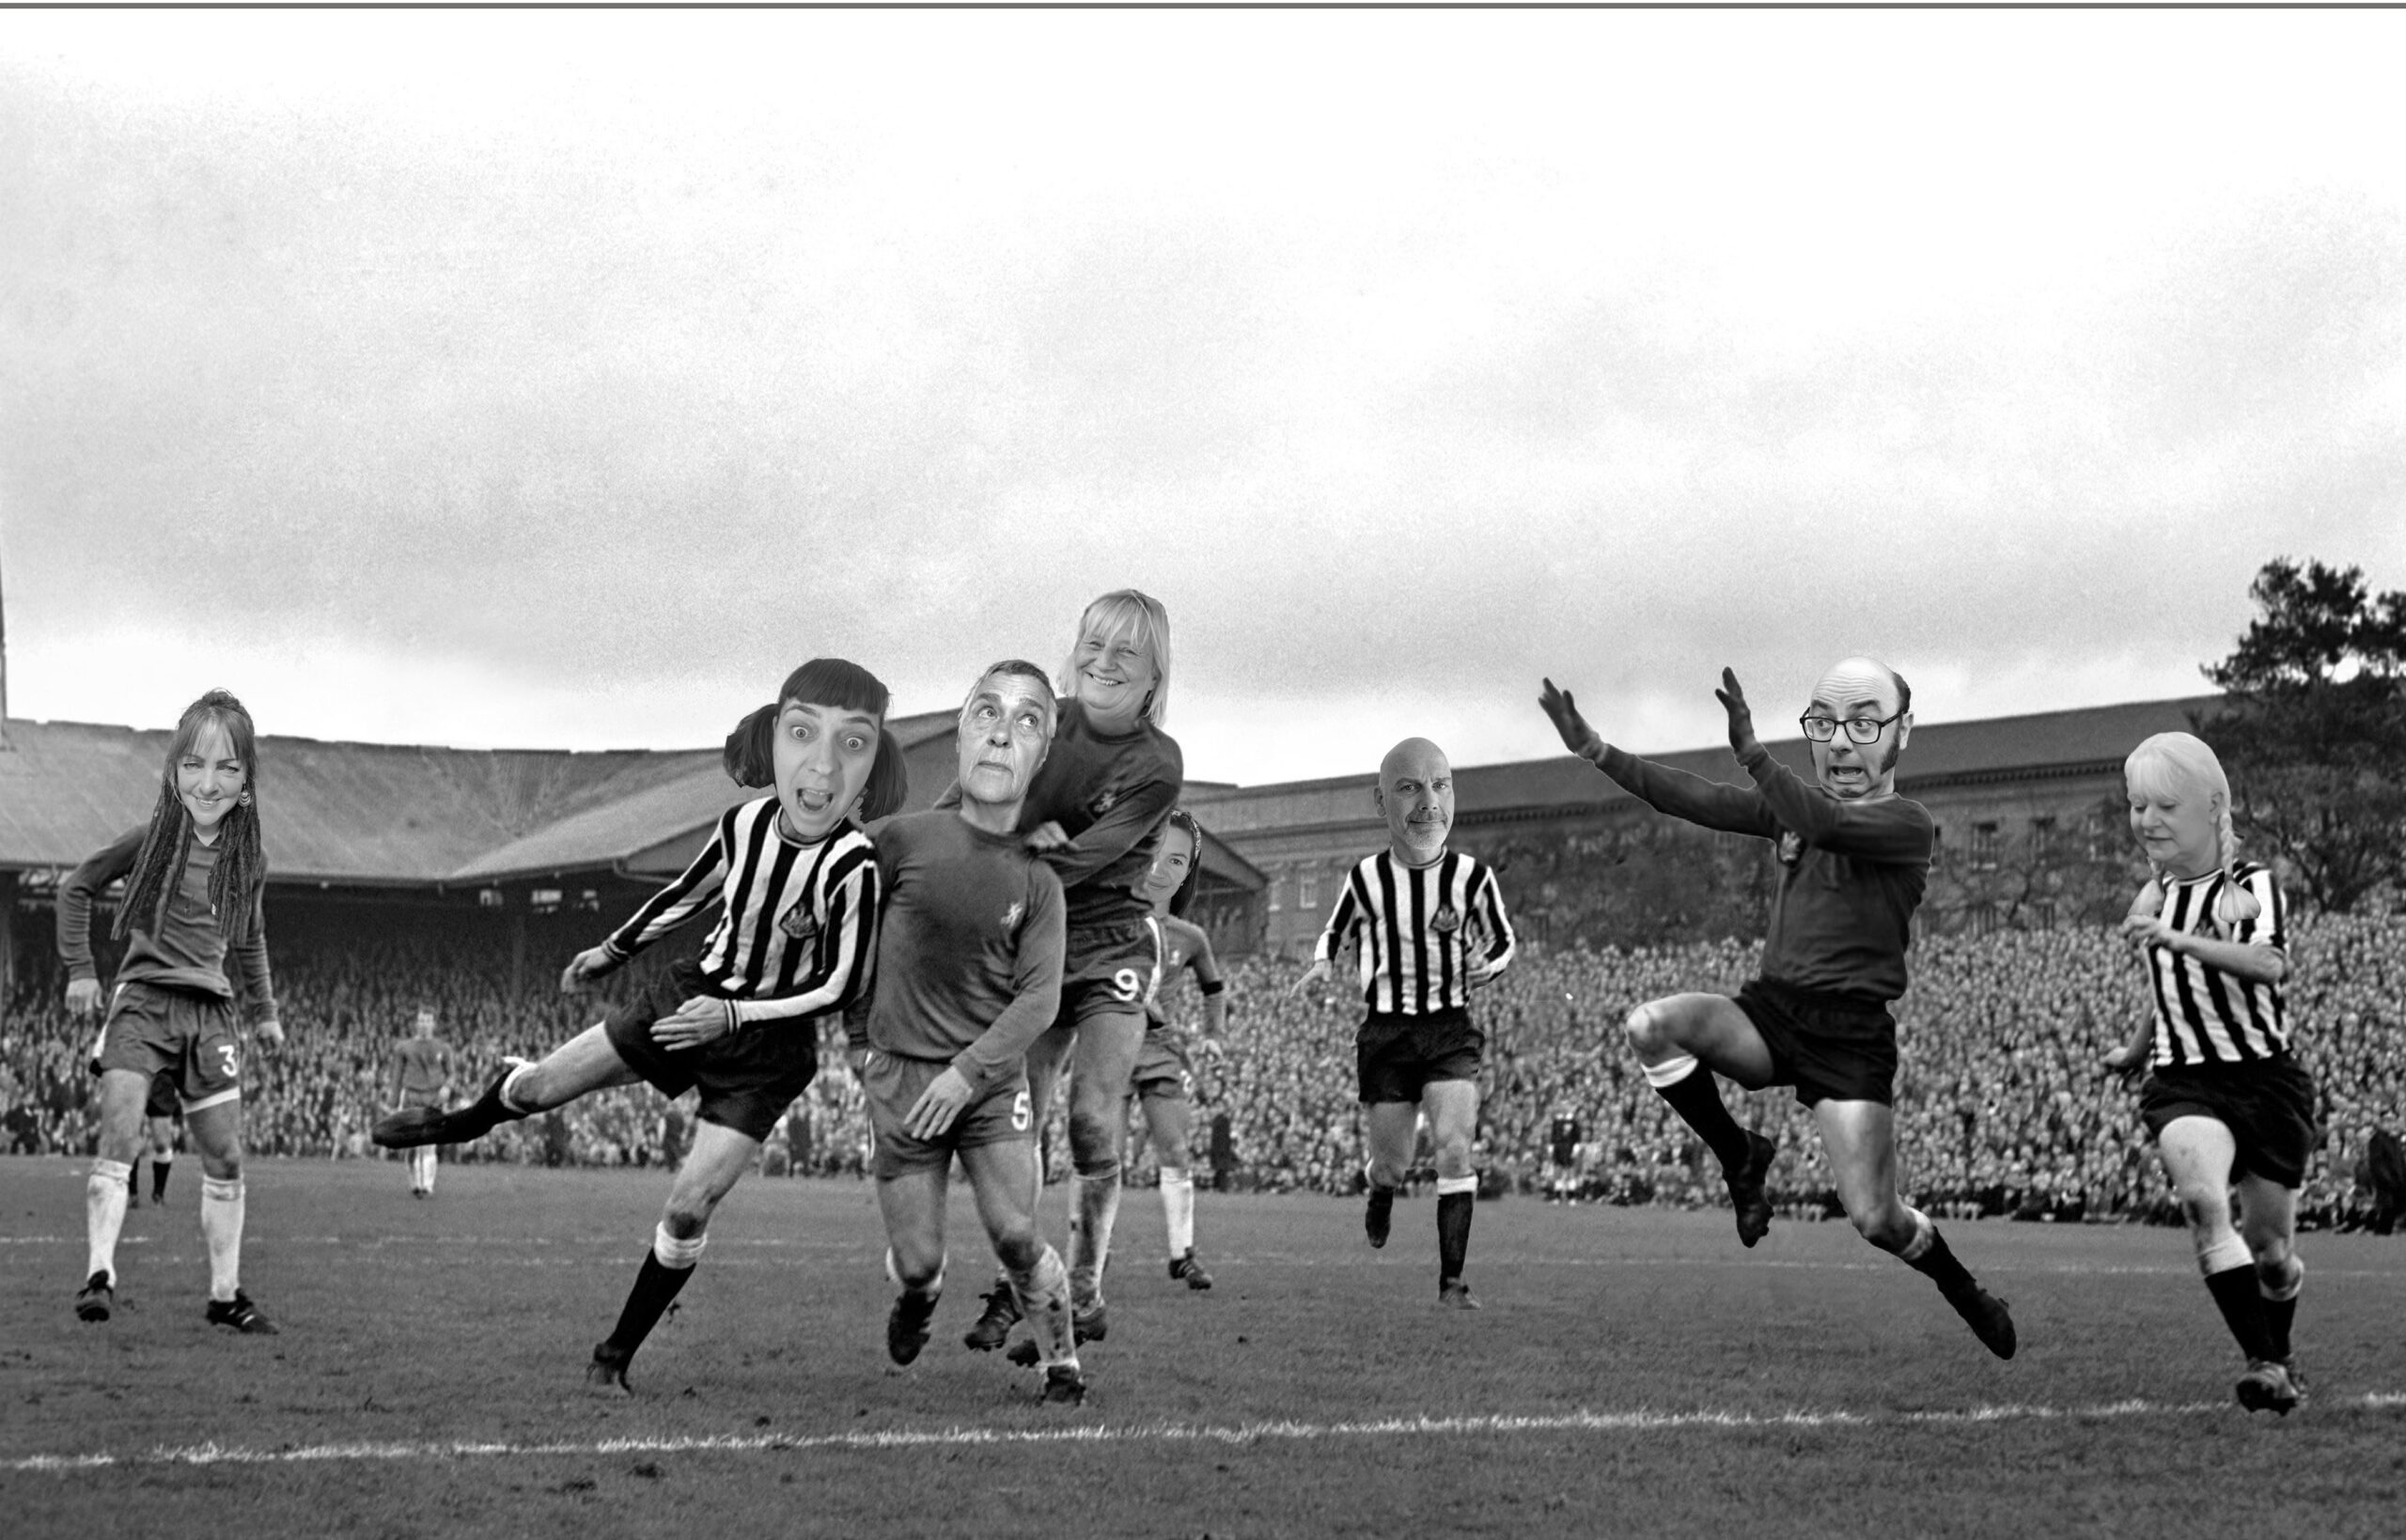 A monochrome image of a football pitch with players in striped tops and dark shorts. The picture is quite old, but the faces of the players have been photoshopped and replaced with more recent photos